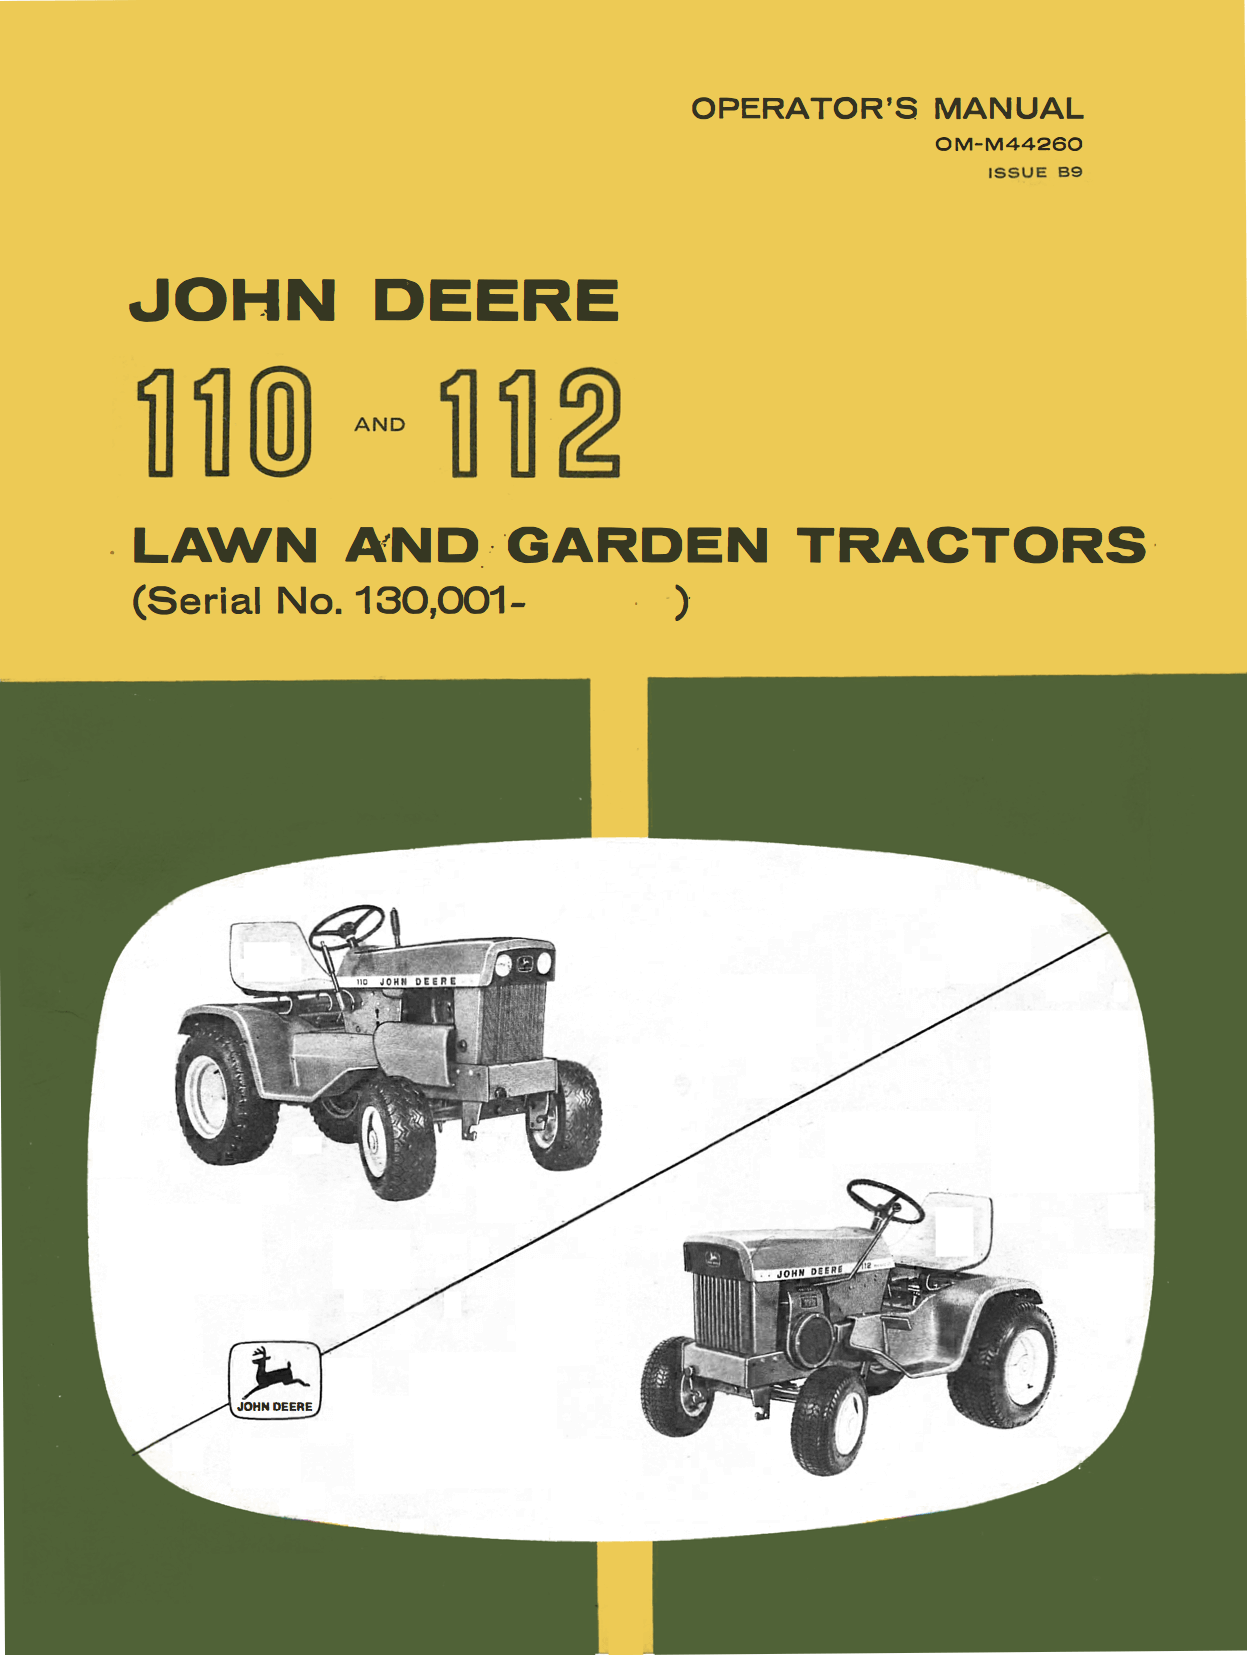 John Deere 110 and 112 Lawn and Garden Tractors - Operator's Manual - Ag Manuals